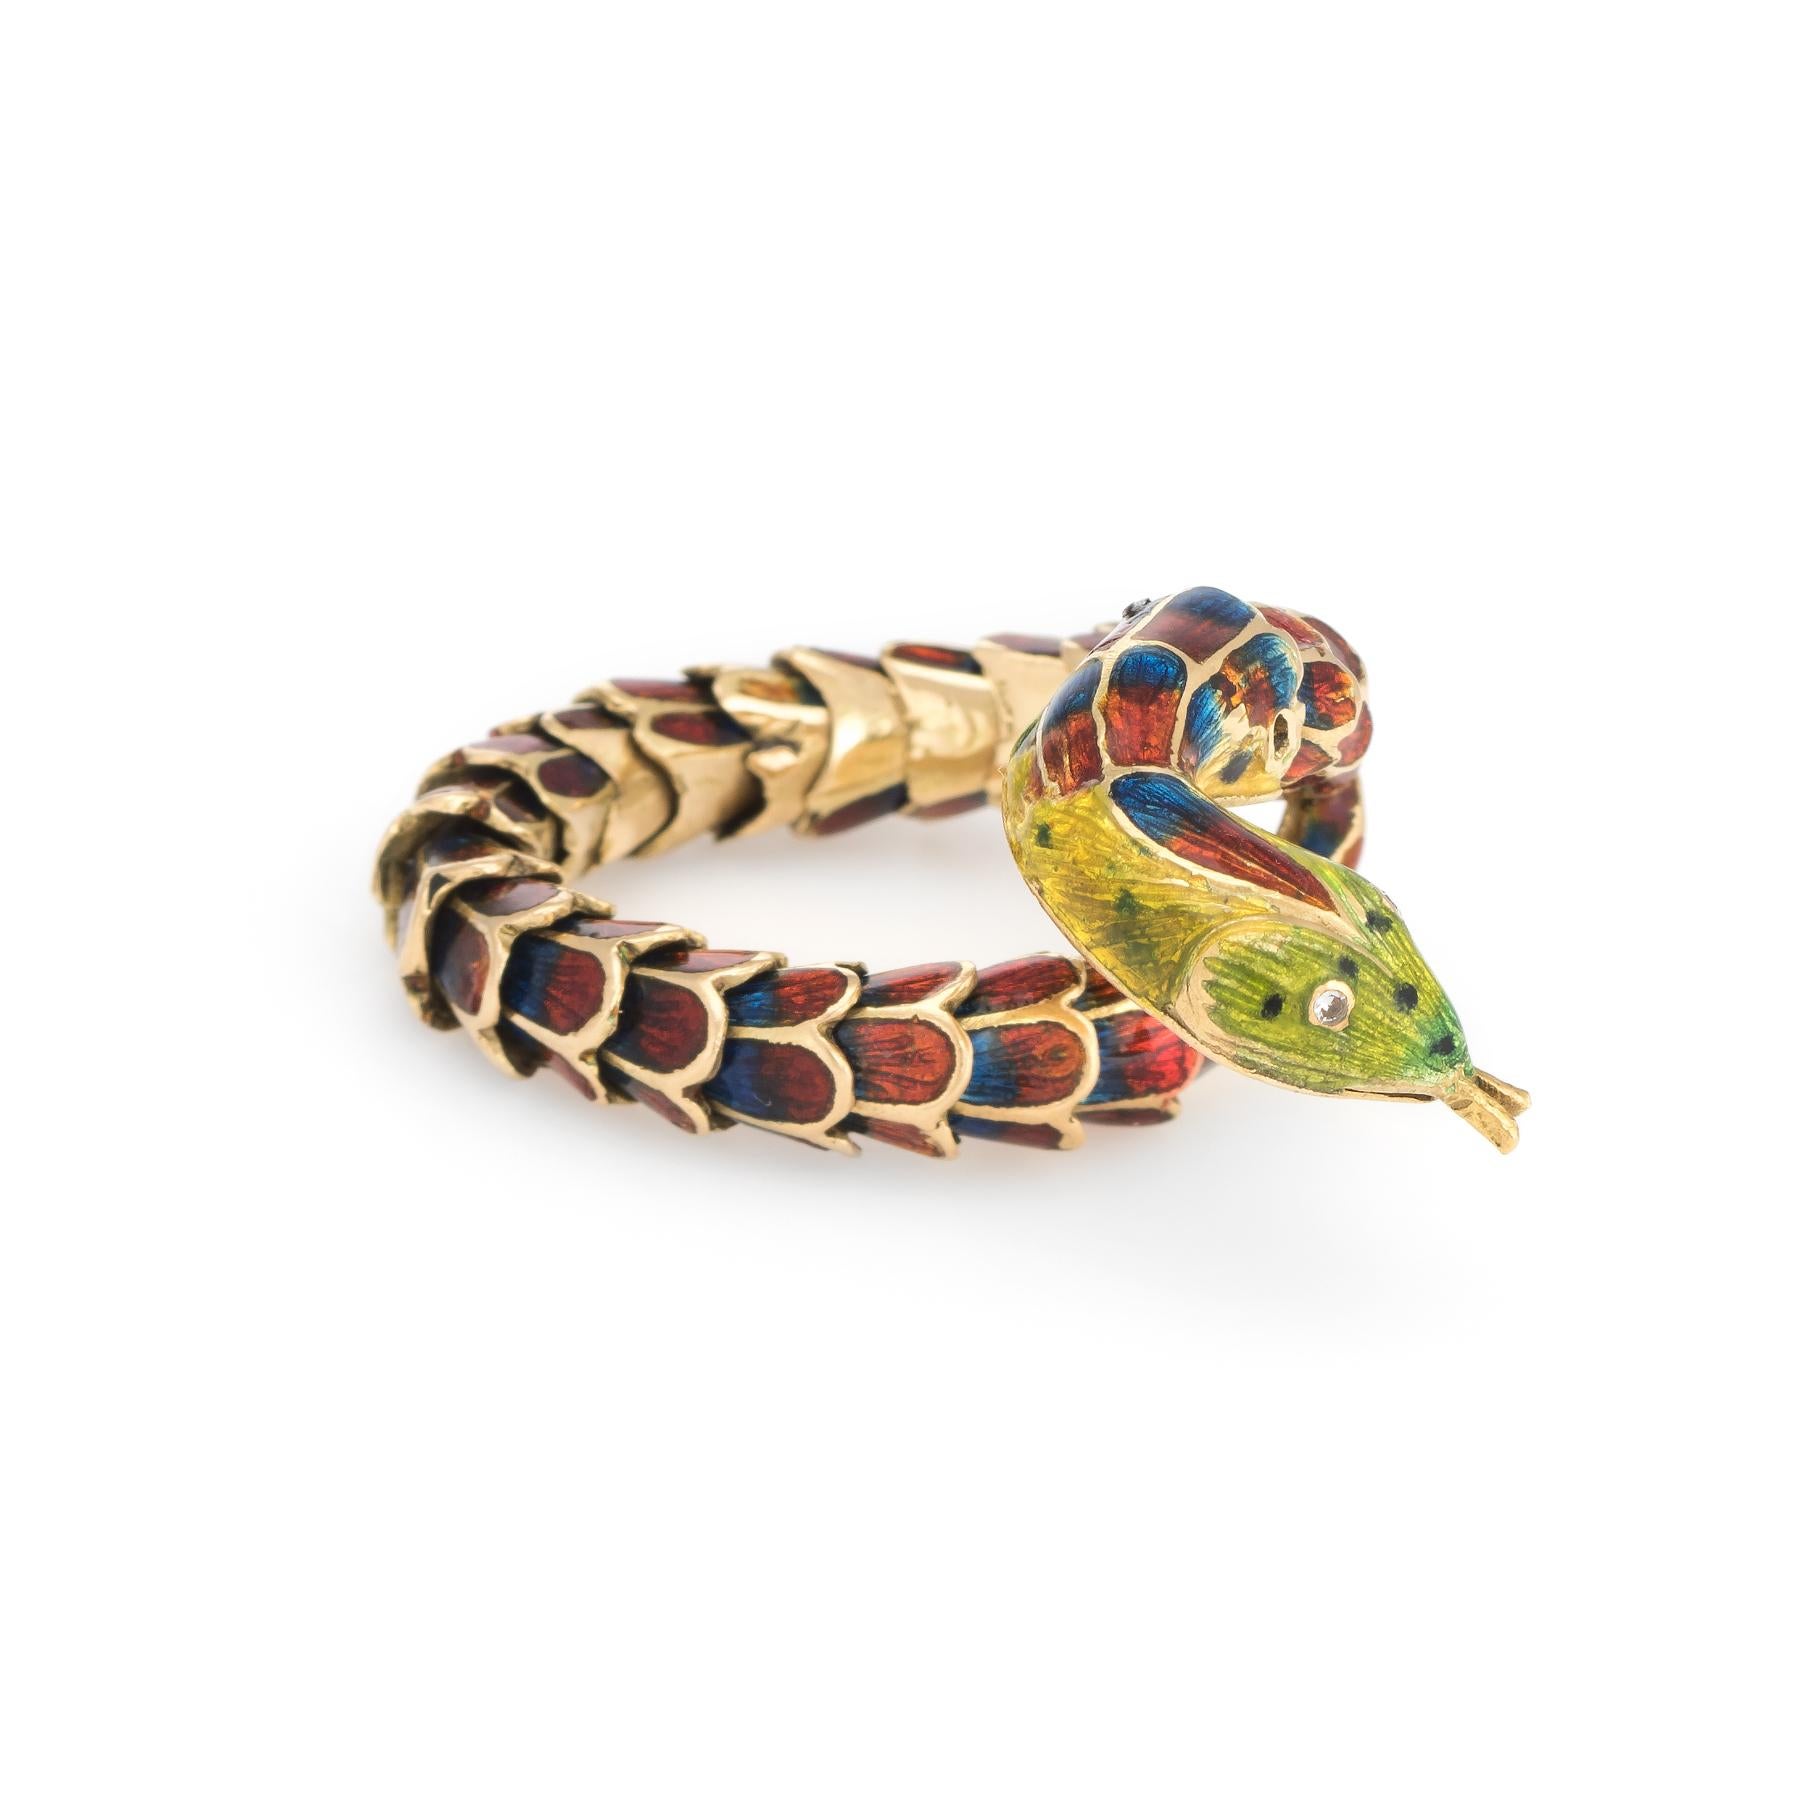 Distinct & stylish vintage snake ring (circa 1960s to 1970s), crafted in 18 karat yellow gold. 

The snake features lifelike detail with conjoined scales that move and allow flexibility of the band. The size of the ring can flex anywhere from a size